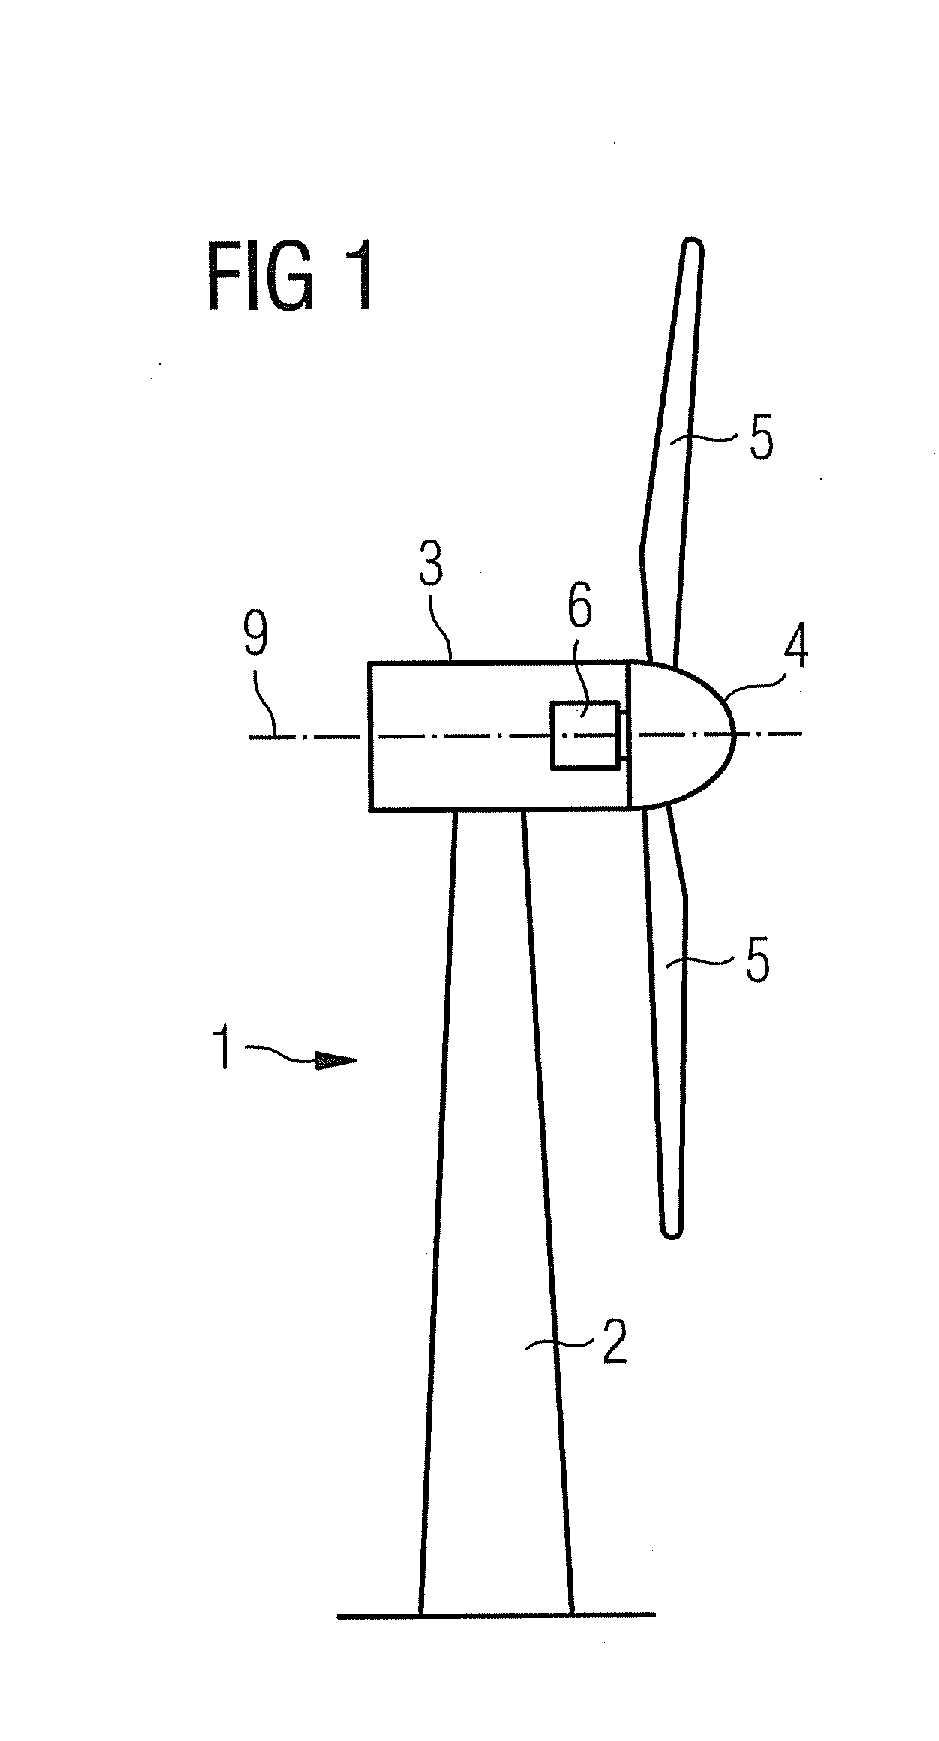 Wind turbine and method for measuring the pitch angle of a wind turbine rotor blade